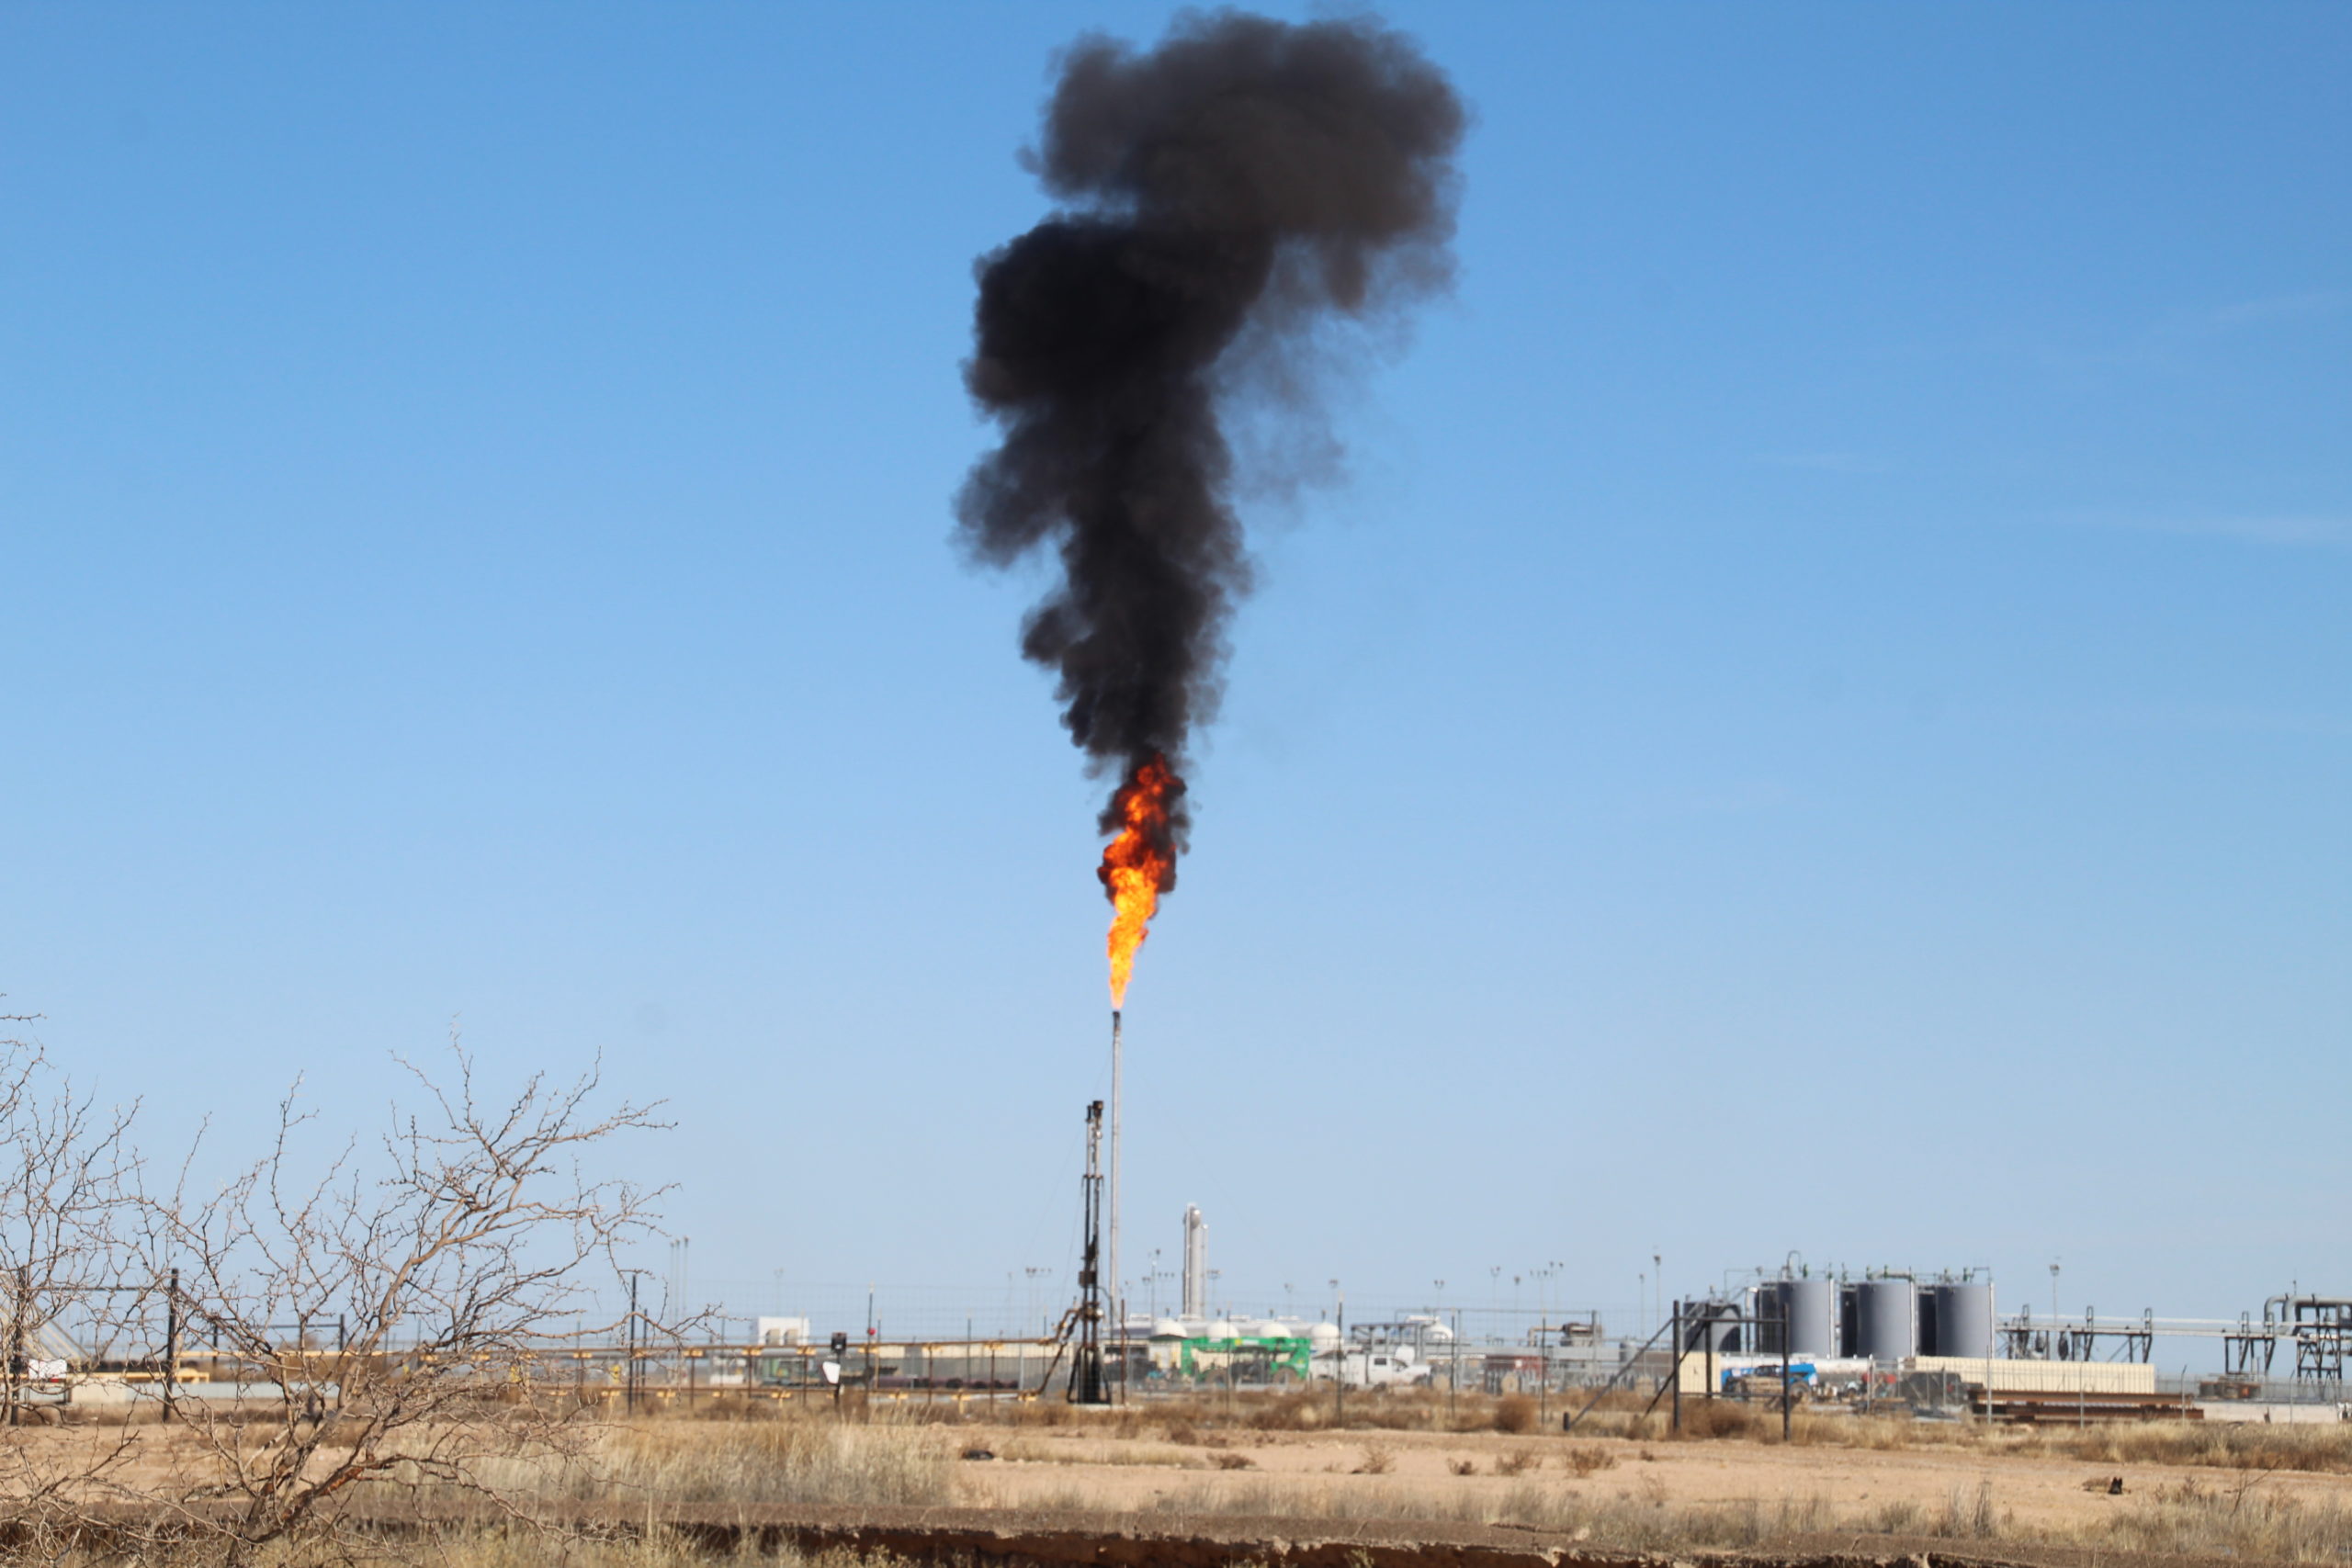 A New Study Finds a Link Between Flaring and an Increase in Premature Births